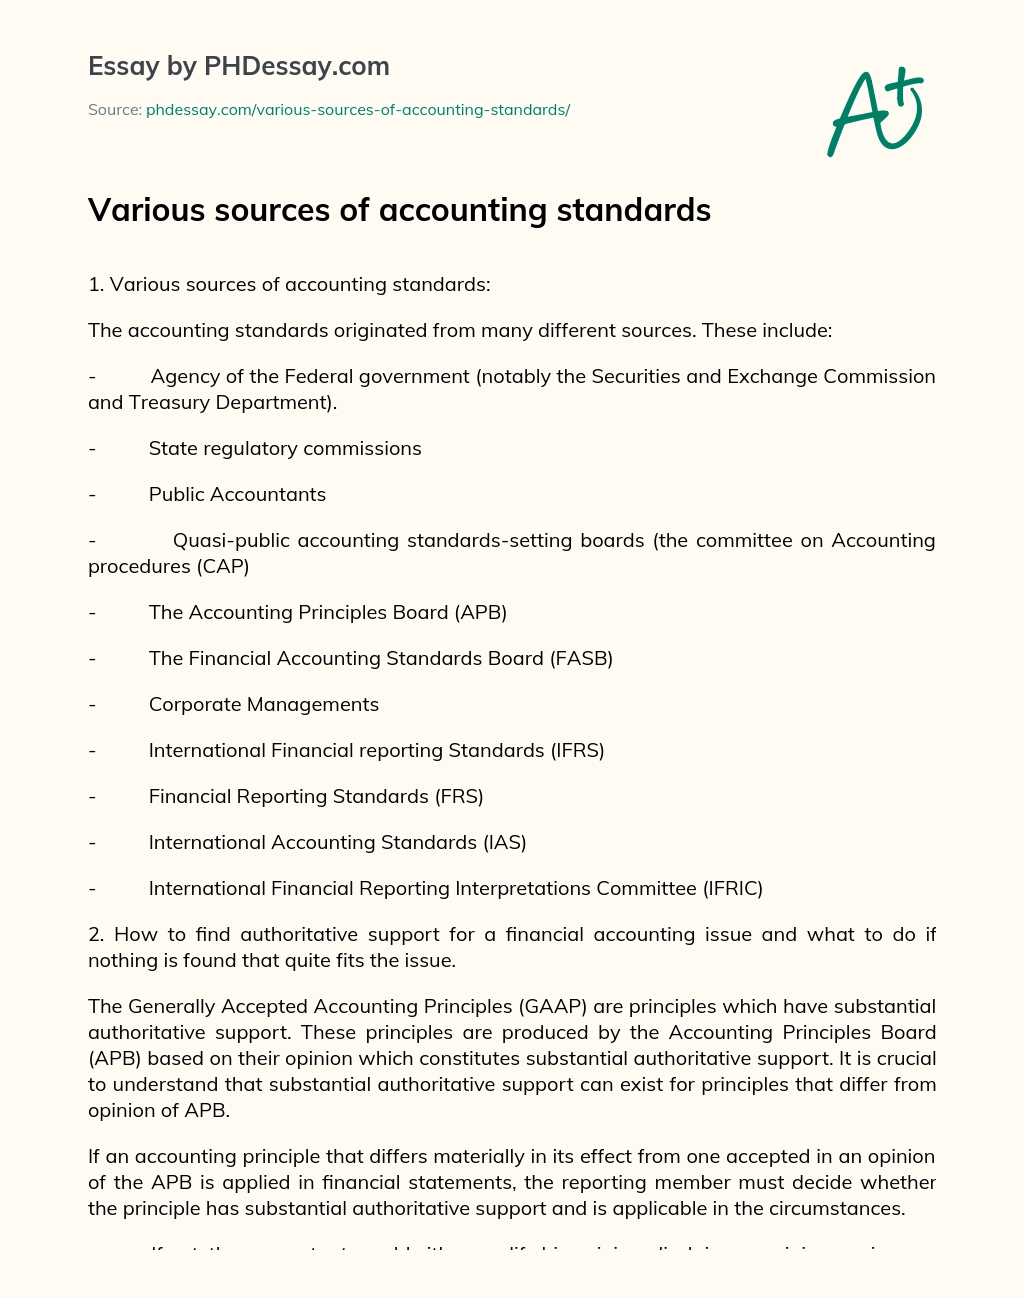 Various sources of accounting standards essay